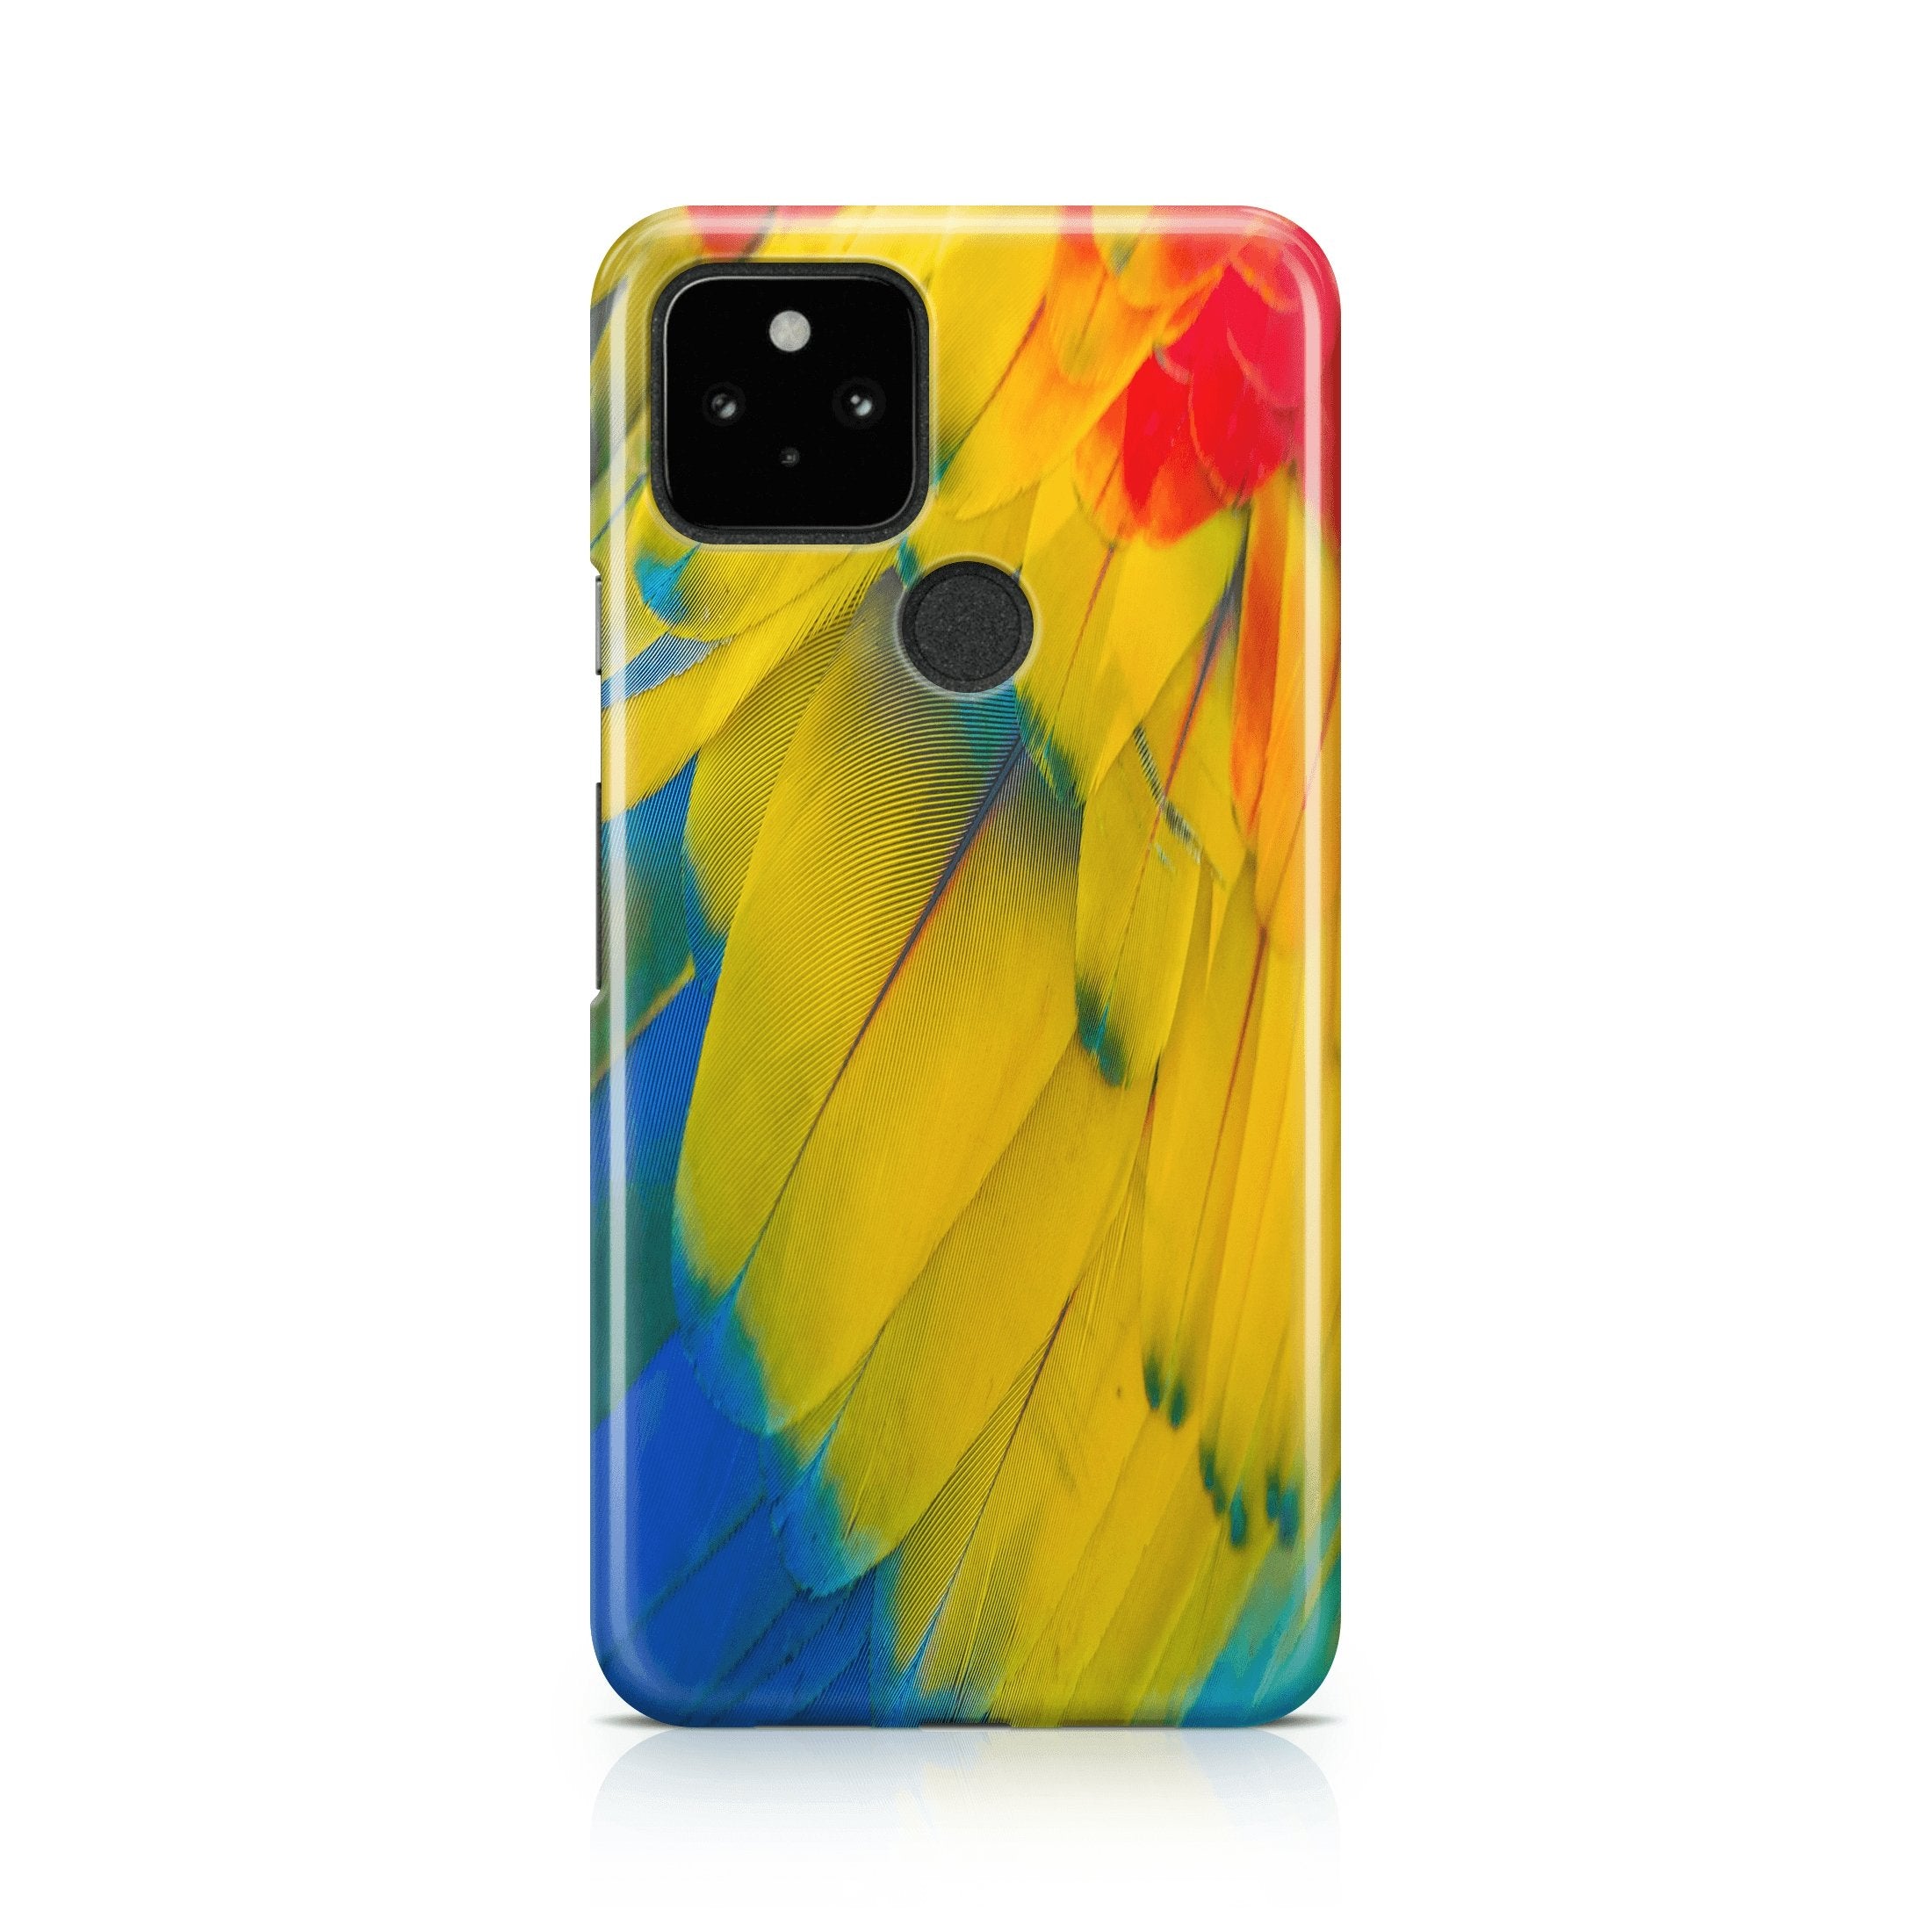 Parrot Feathers - Google phone case designs by CaseSwagger